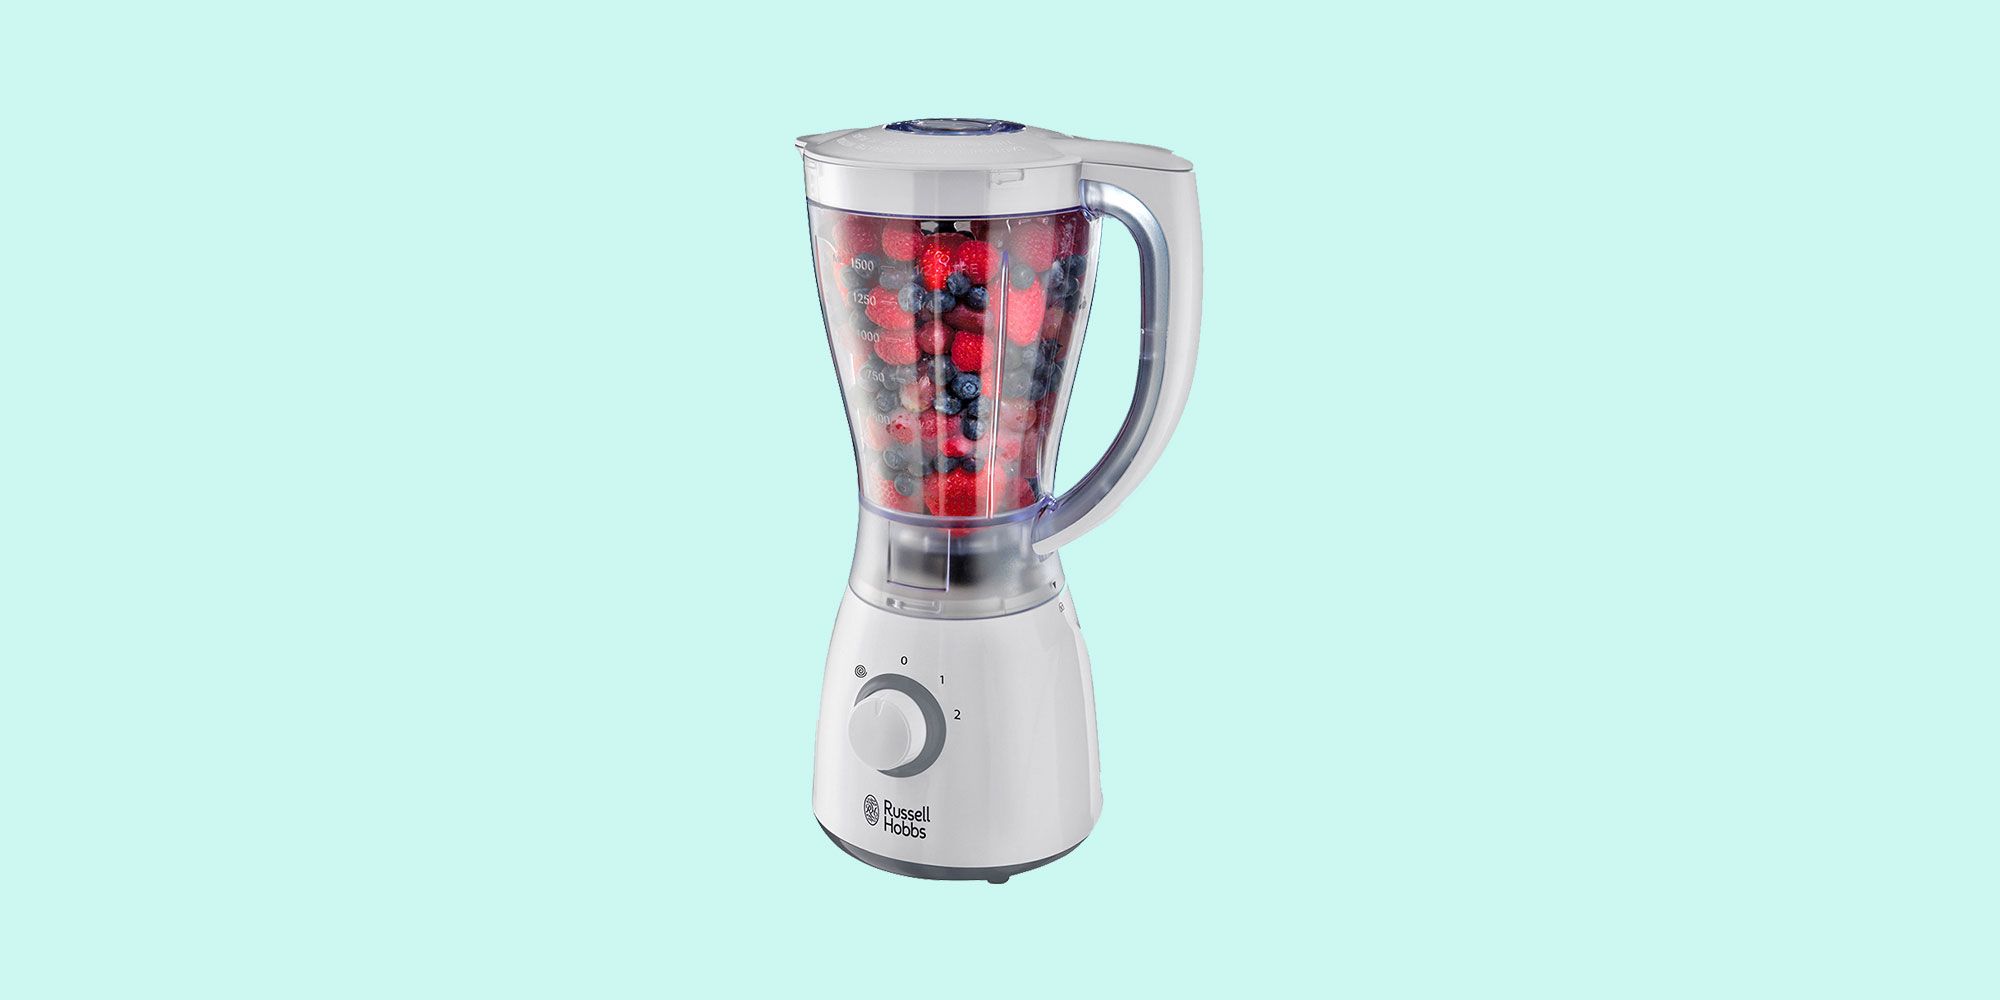 peanuts Tiny Passerby Russell Hobbs 25960 Go Create 1.5L Jug Blender review